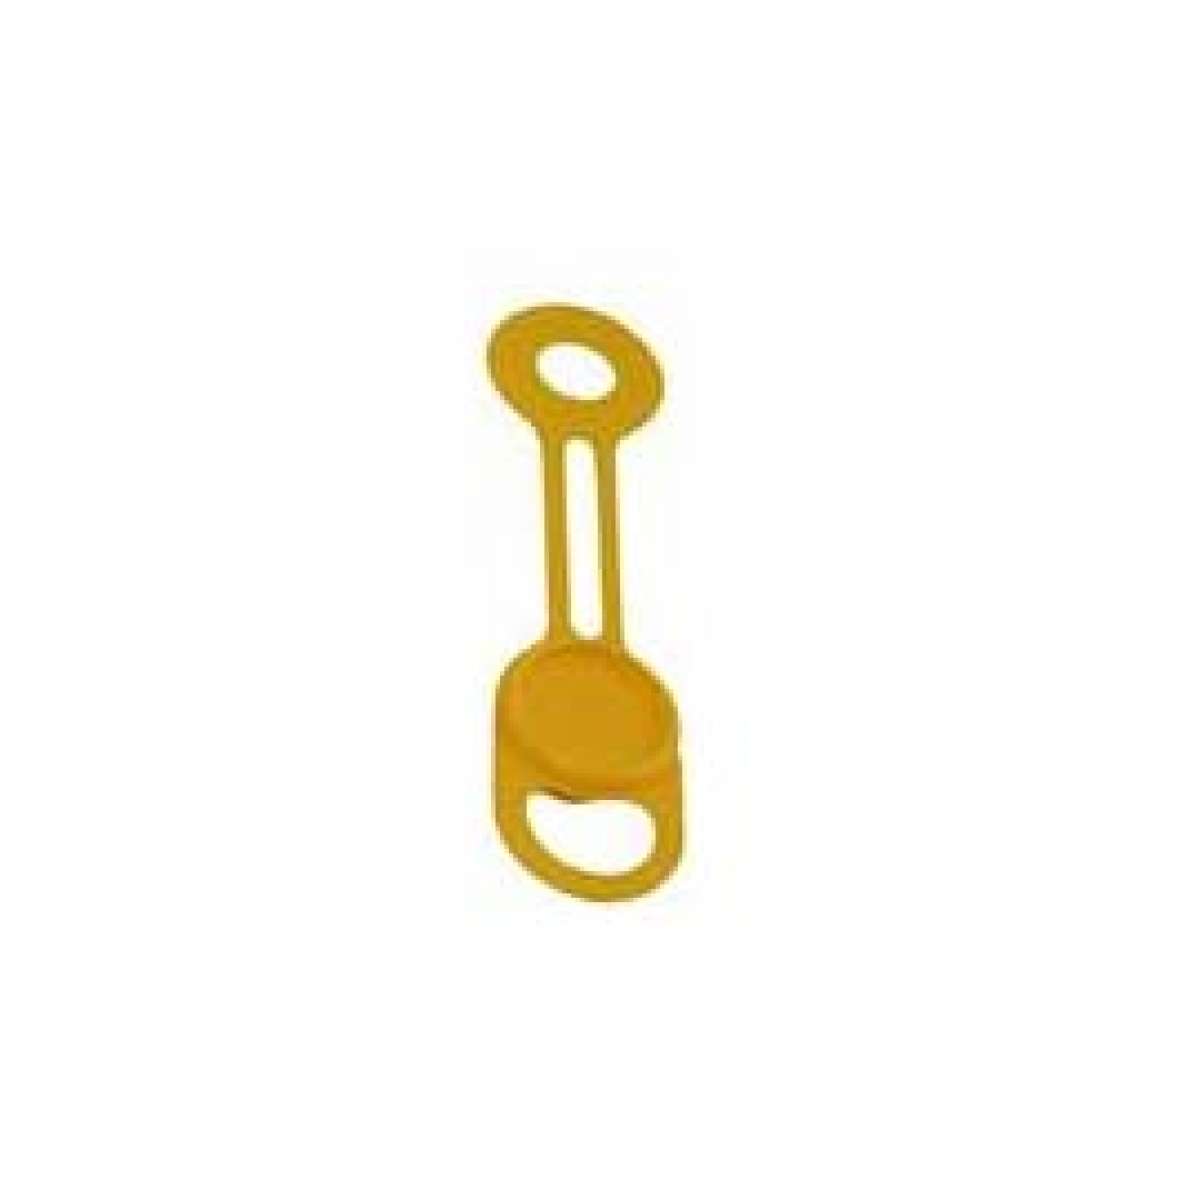 13/32" Grease Fitting Protector (Yellow) - Pack of 100